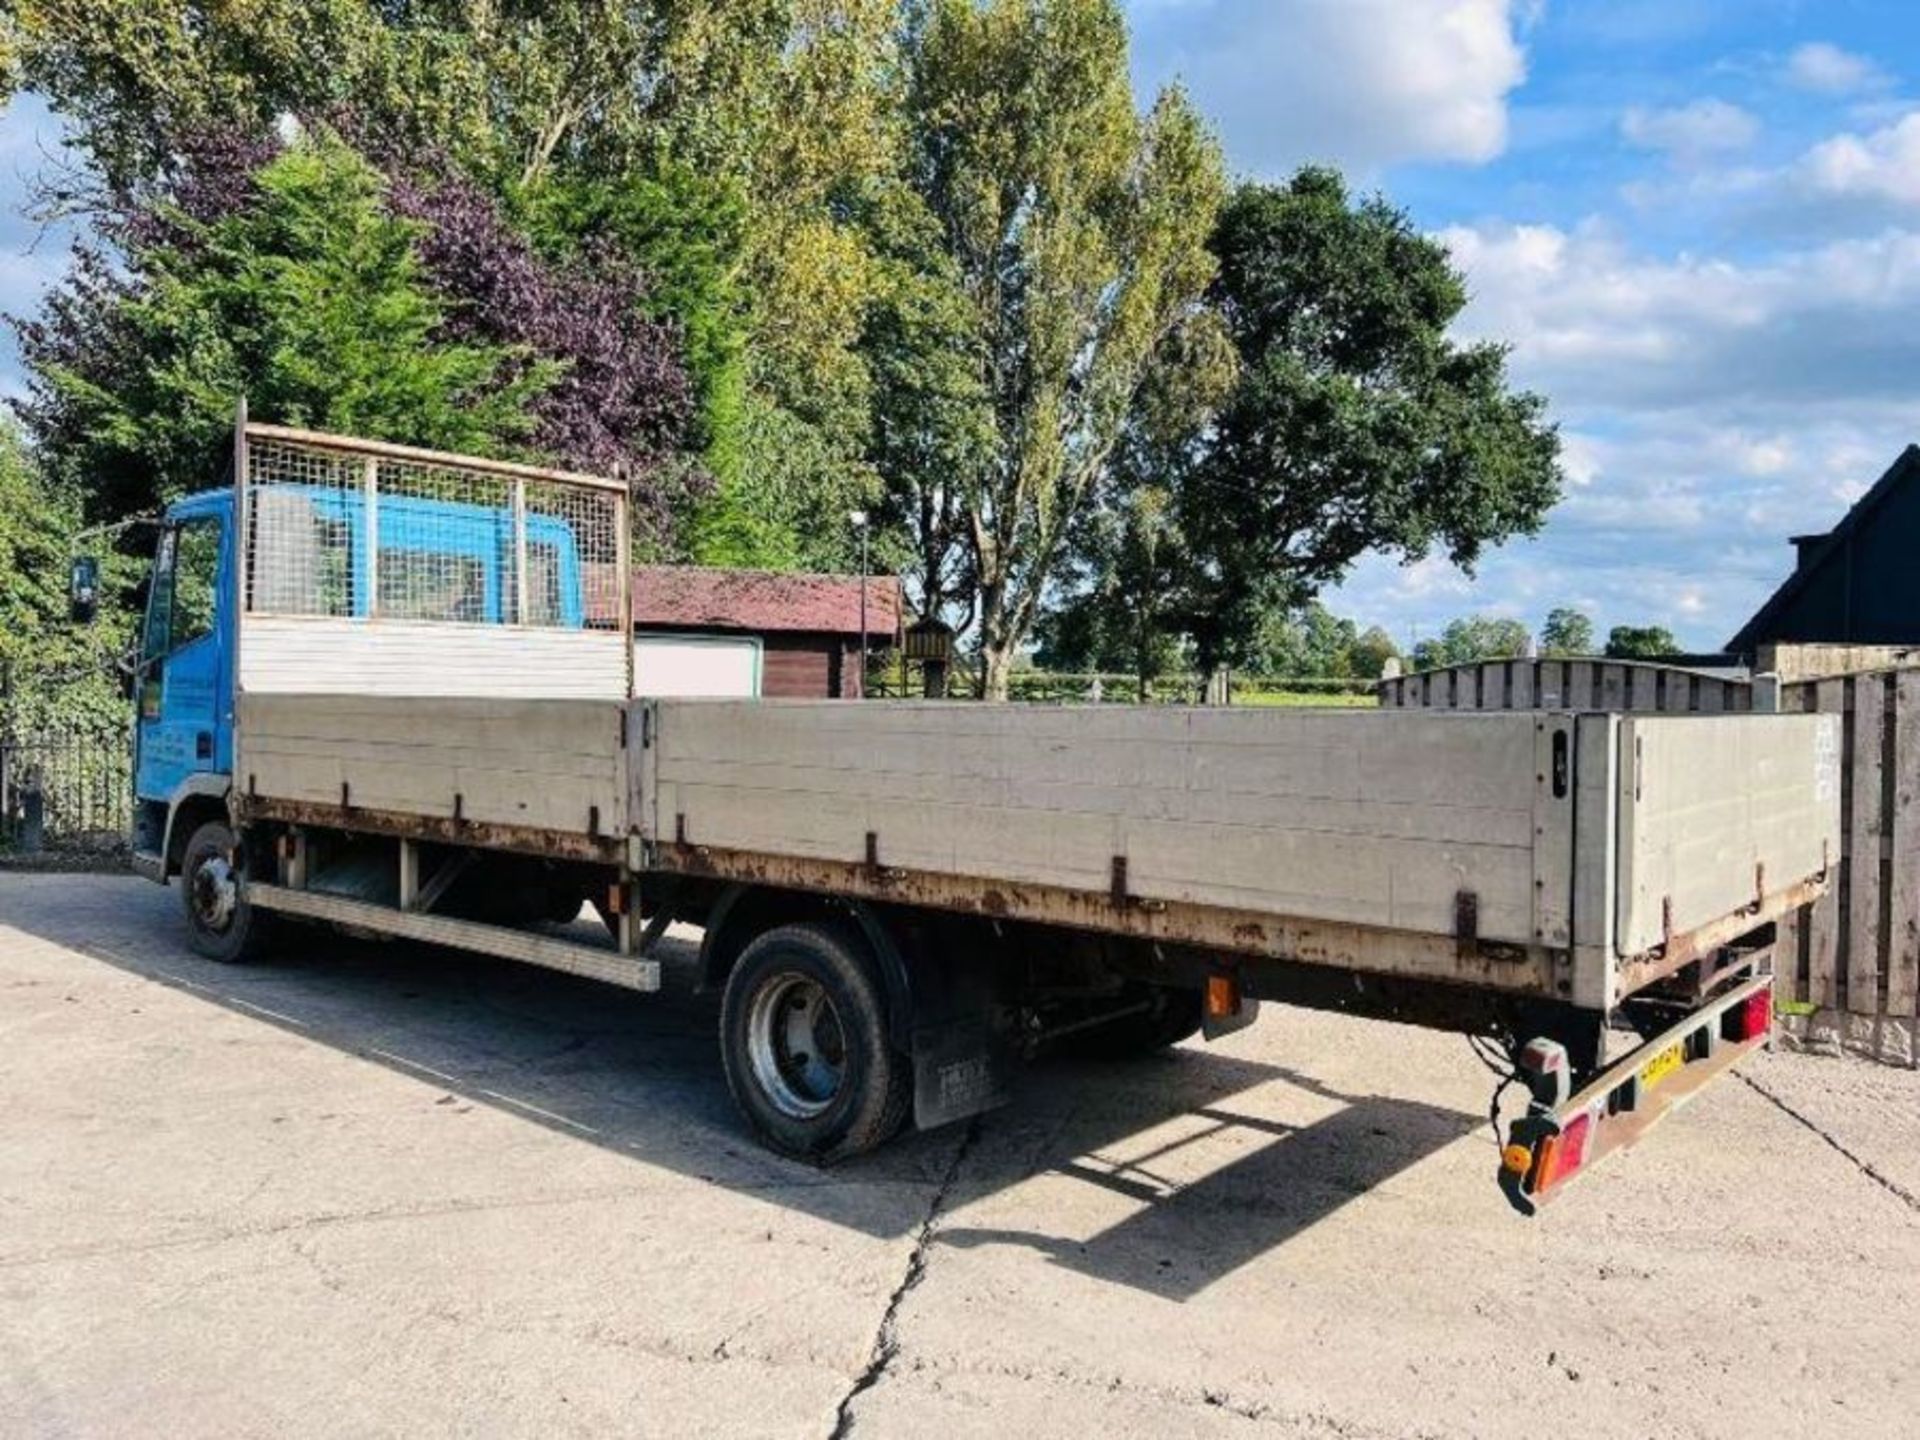 IVECO 4X2 FLAT BED LORRY C/W DROP SIDE BODY